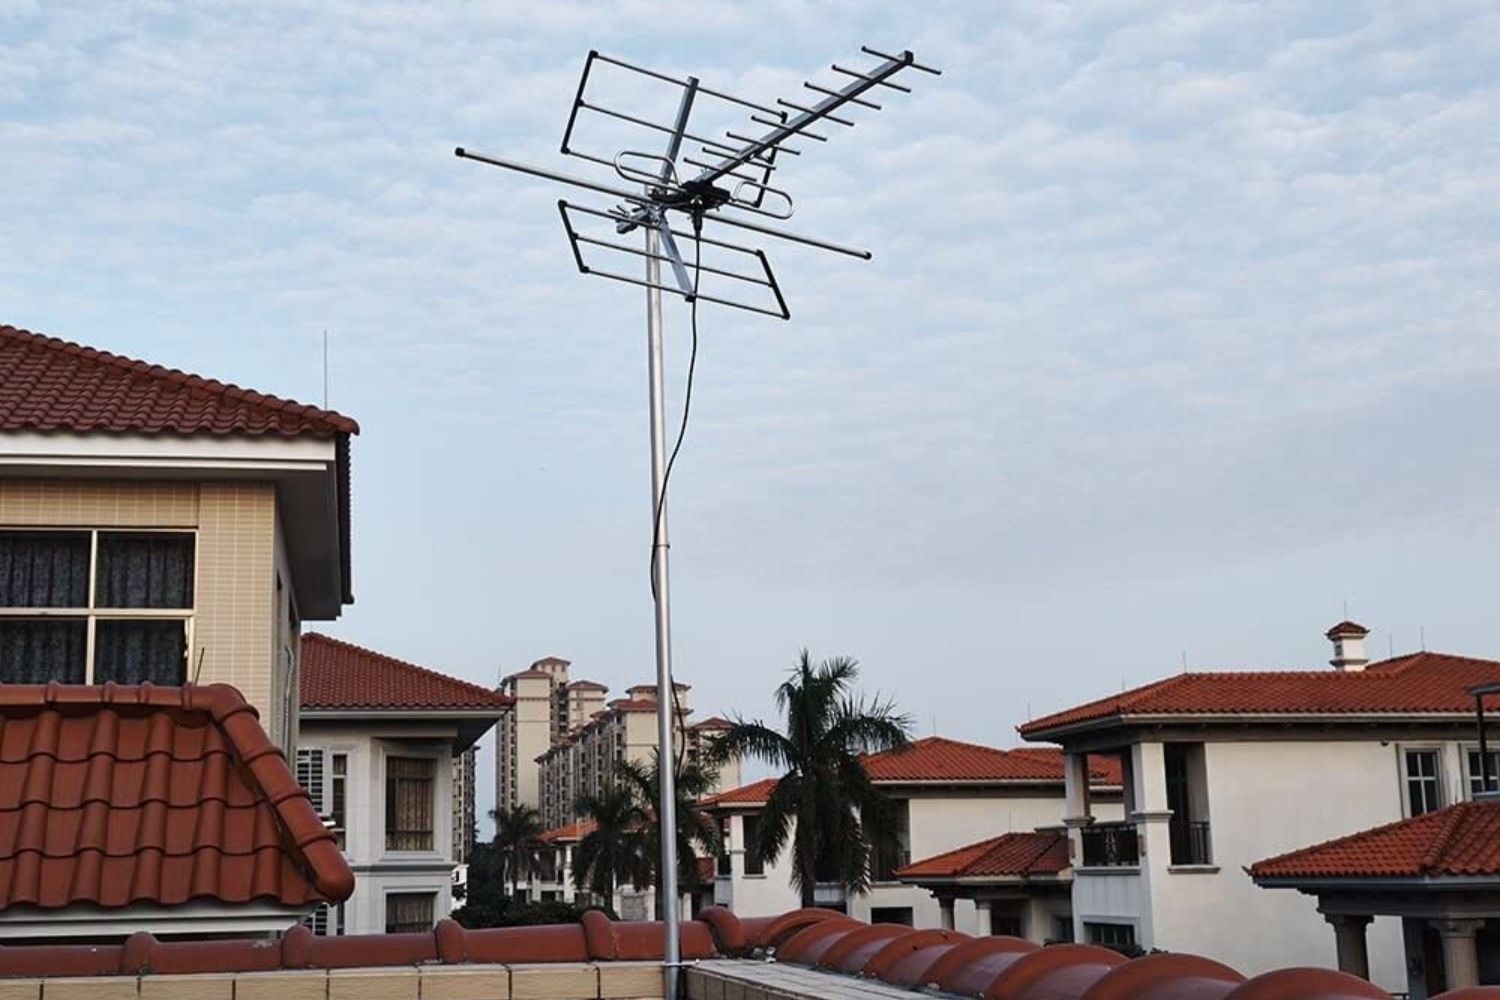 Satelite dish installed on a rooftop